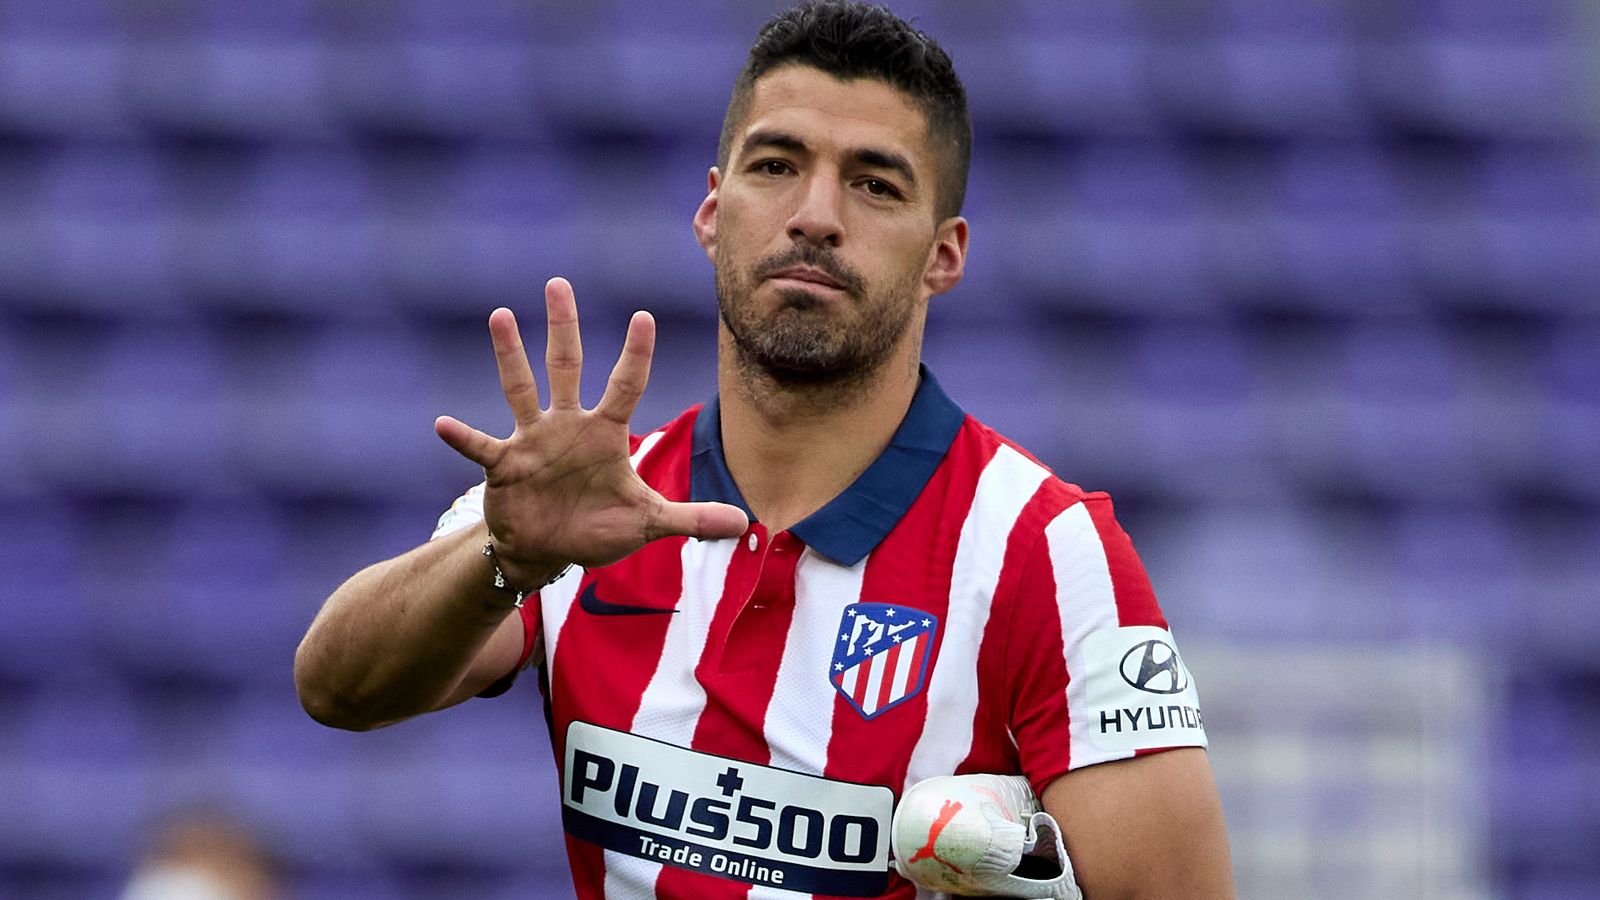 Luis Suarez Atletico Madrid La Liga Champion Says He Was Looked Down On In Barcelona Exit